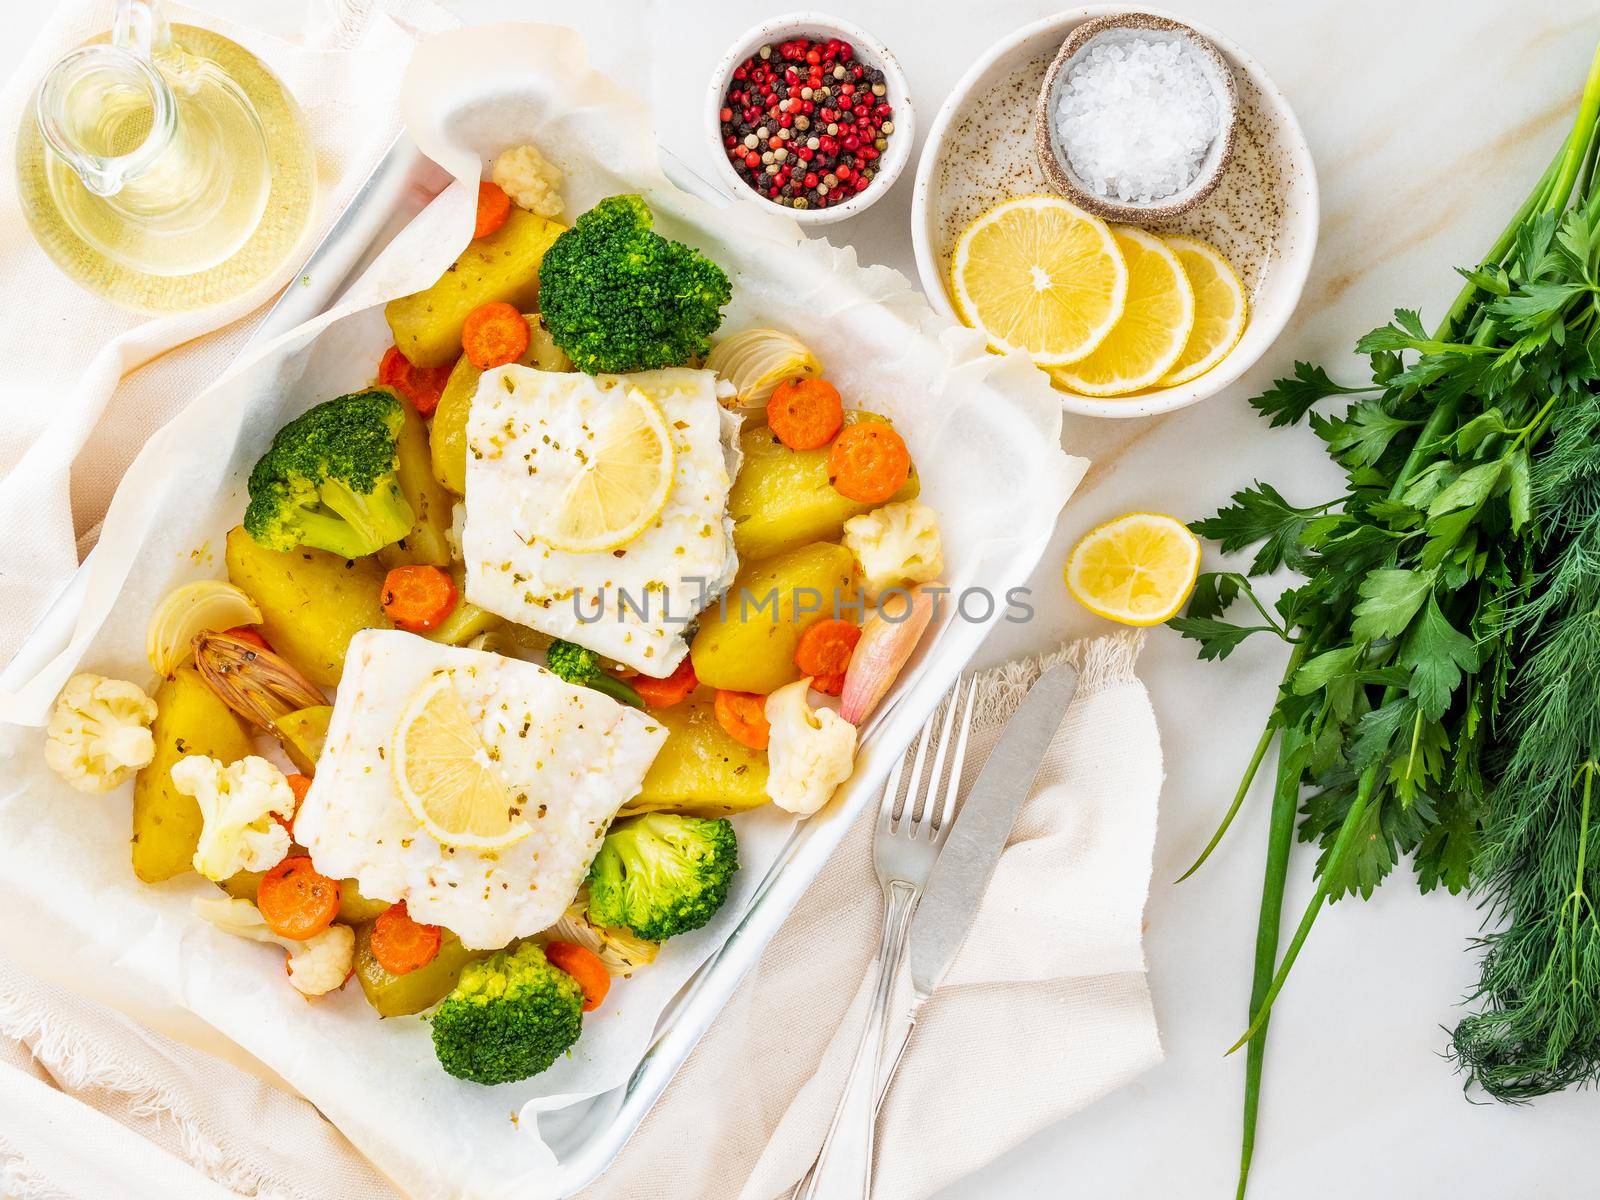 Fish cod baked in the oven with vegetables - healthy diet healthy food. Light white marble table, copy space, top view.